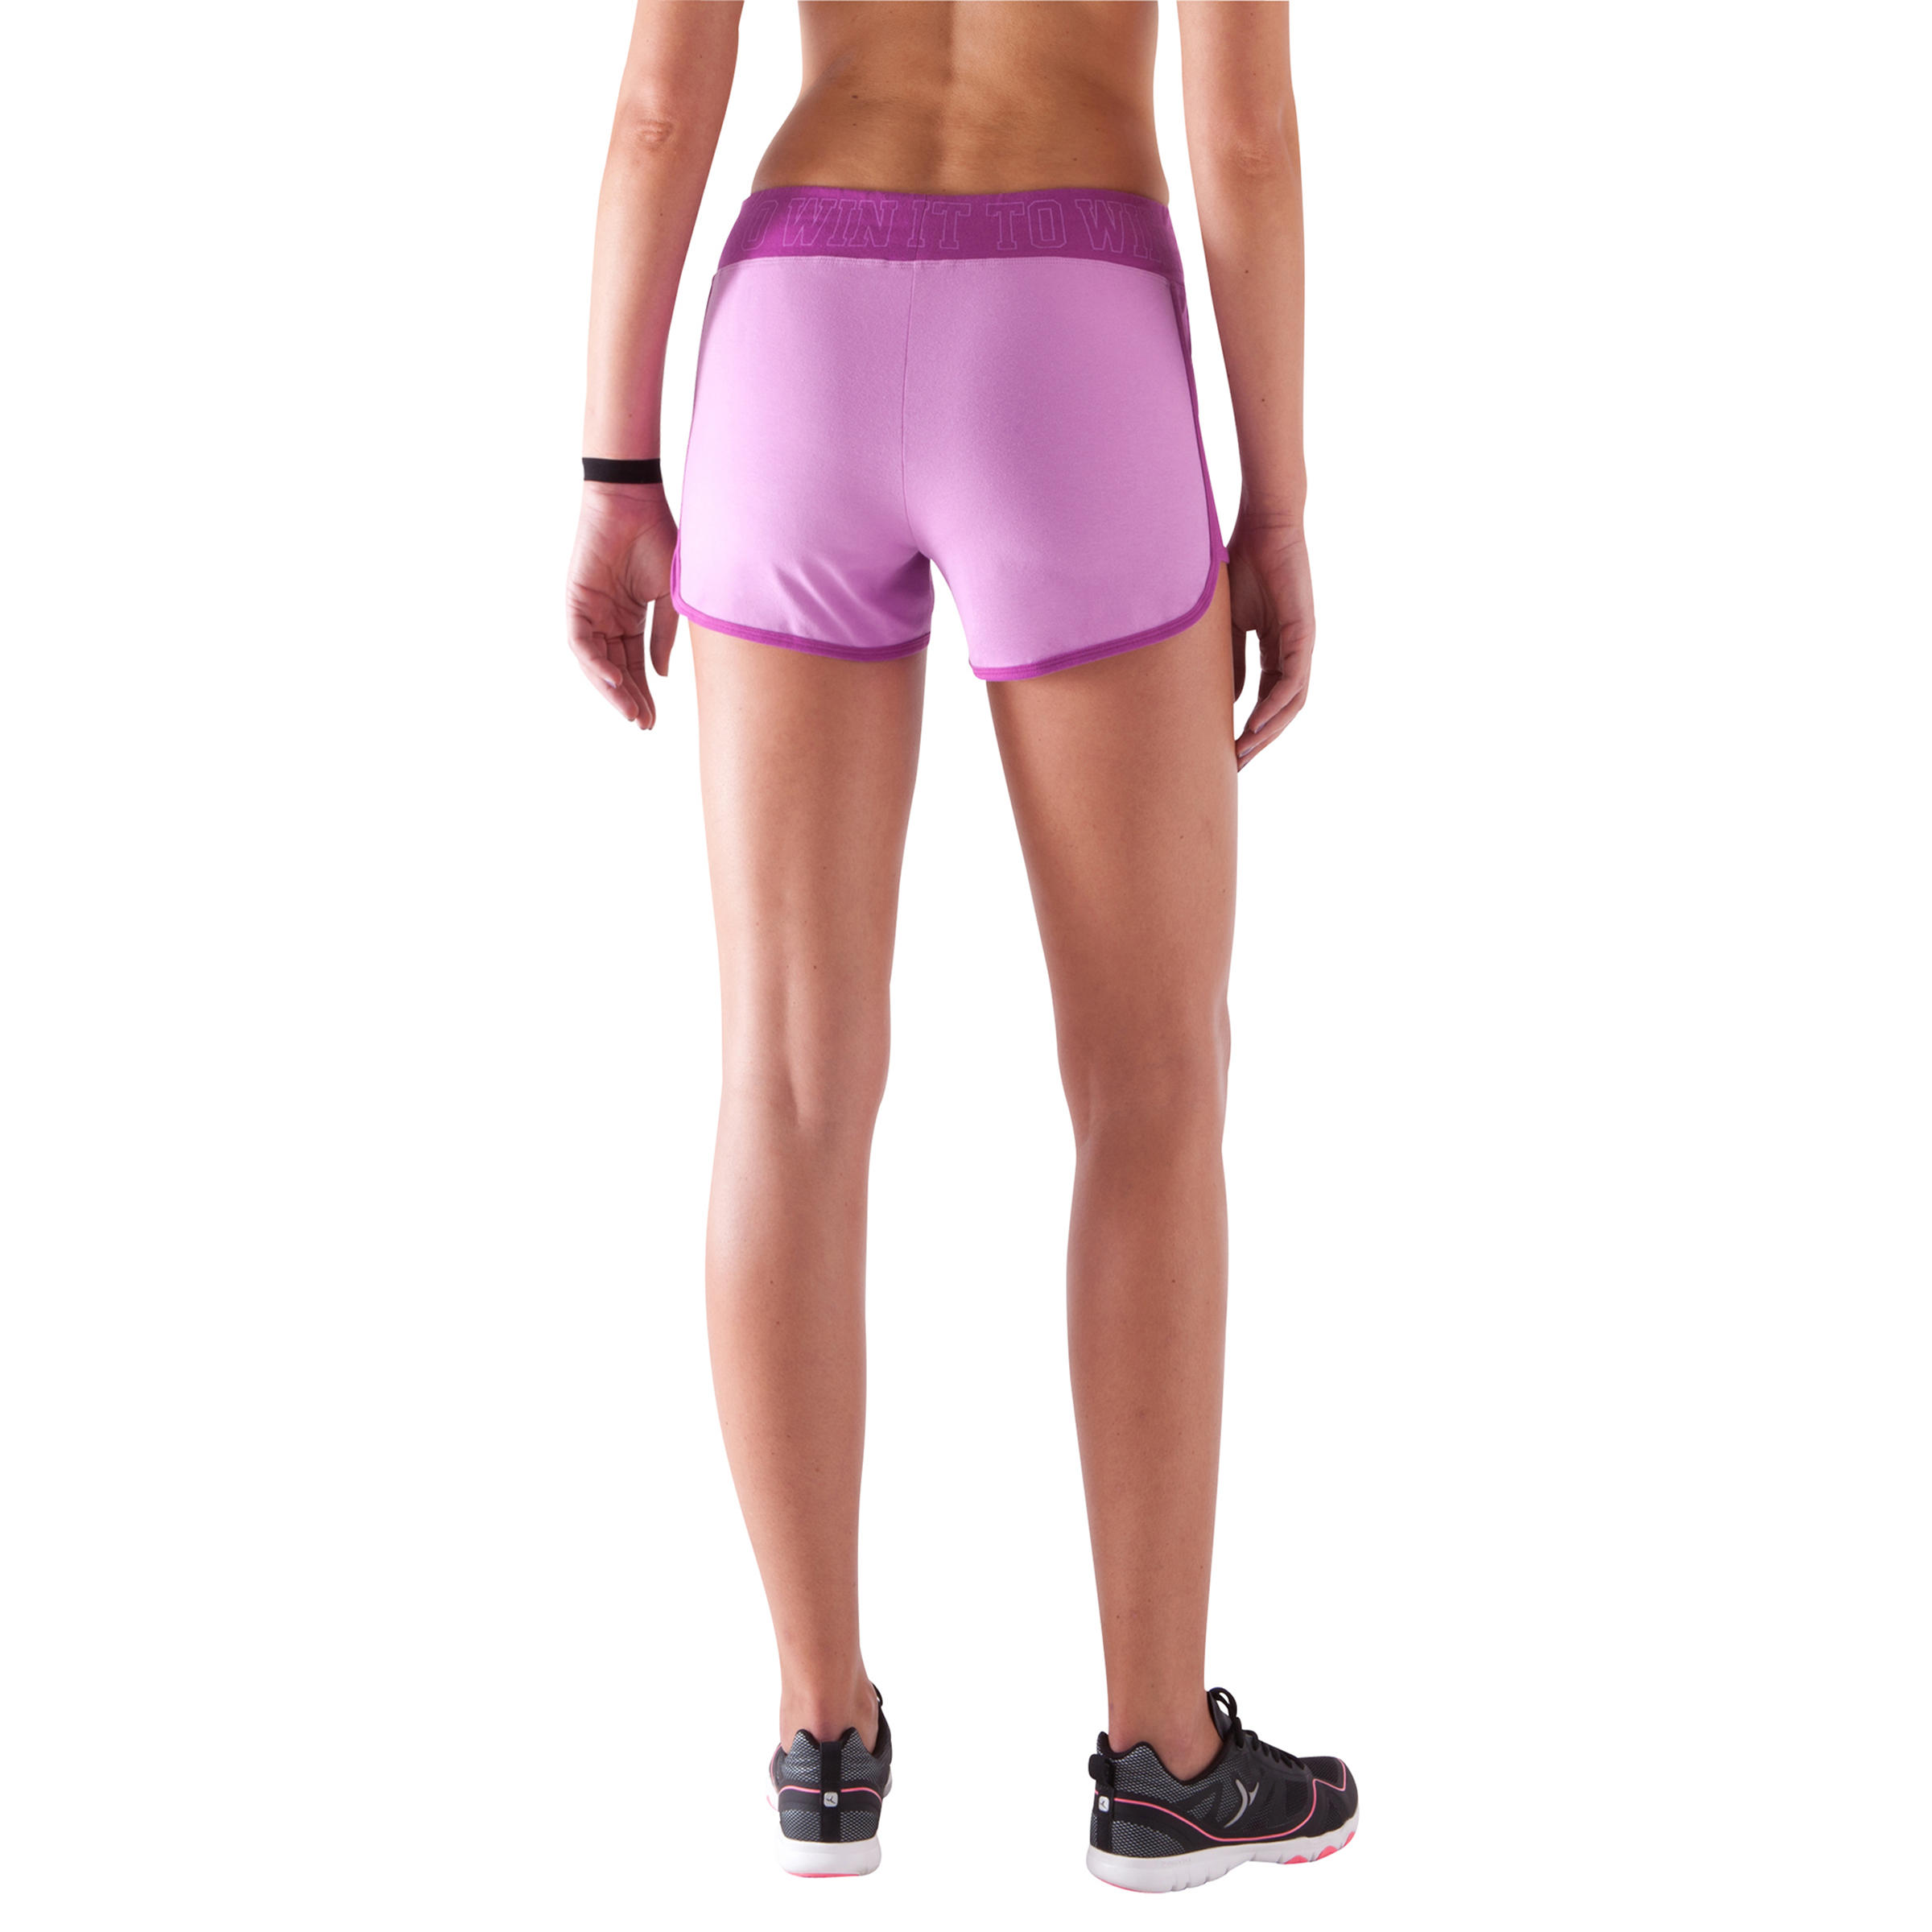 Women's Fitness Shorts with Contrasting Print Waistband - Mauve/Dark Pink 6/11